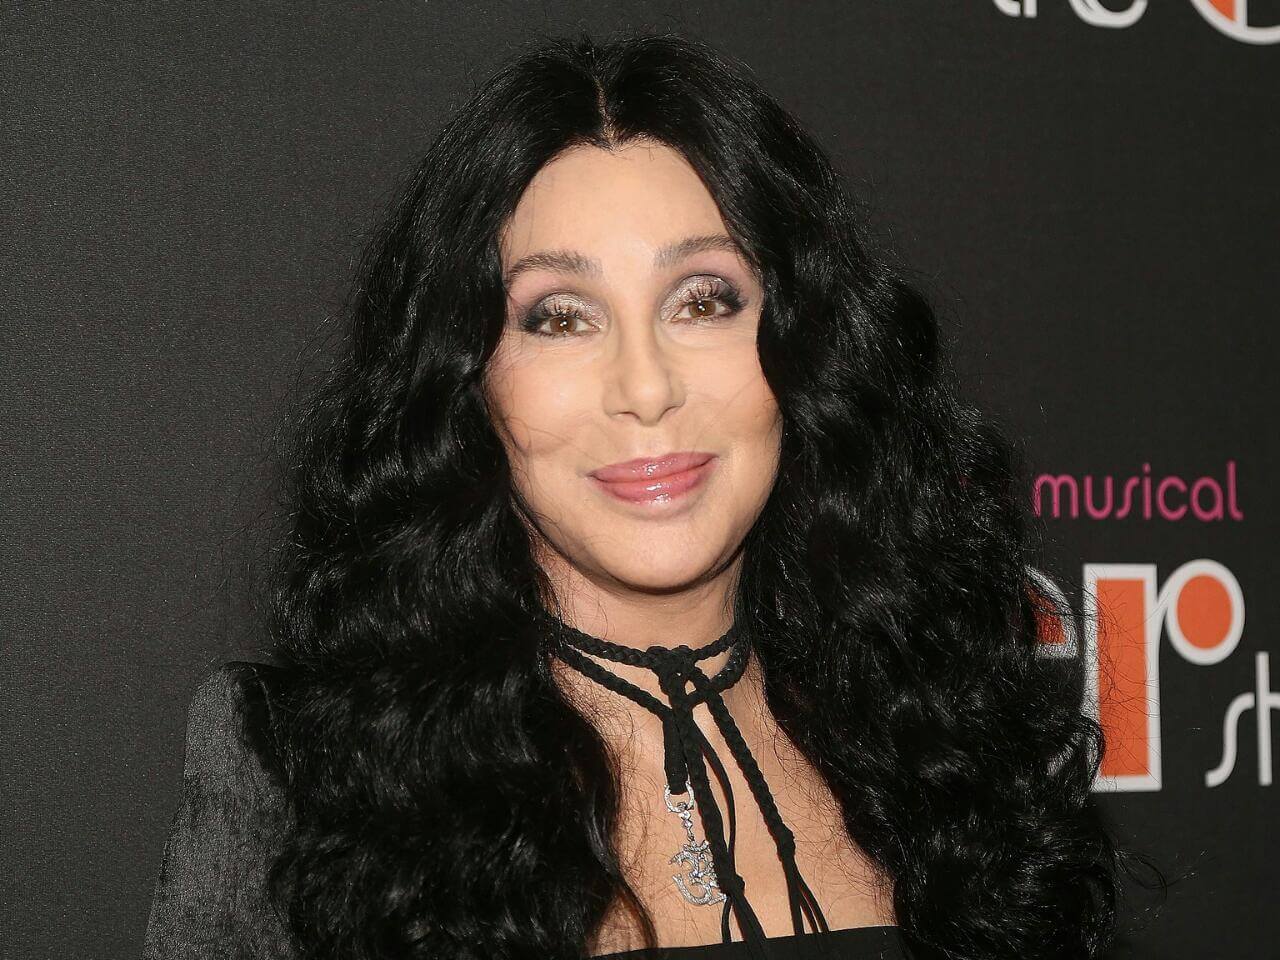 What is Cher's net worth 2021?